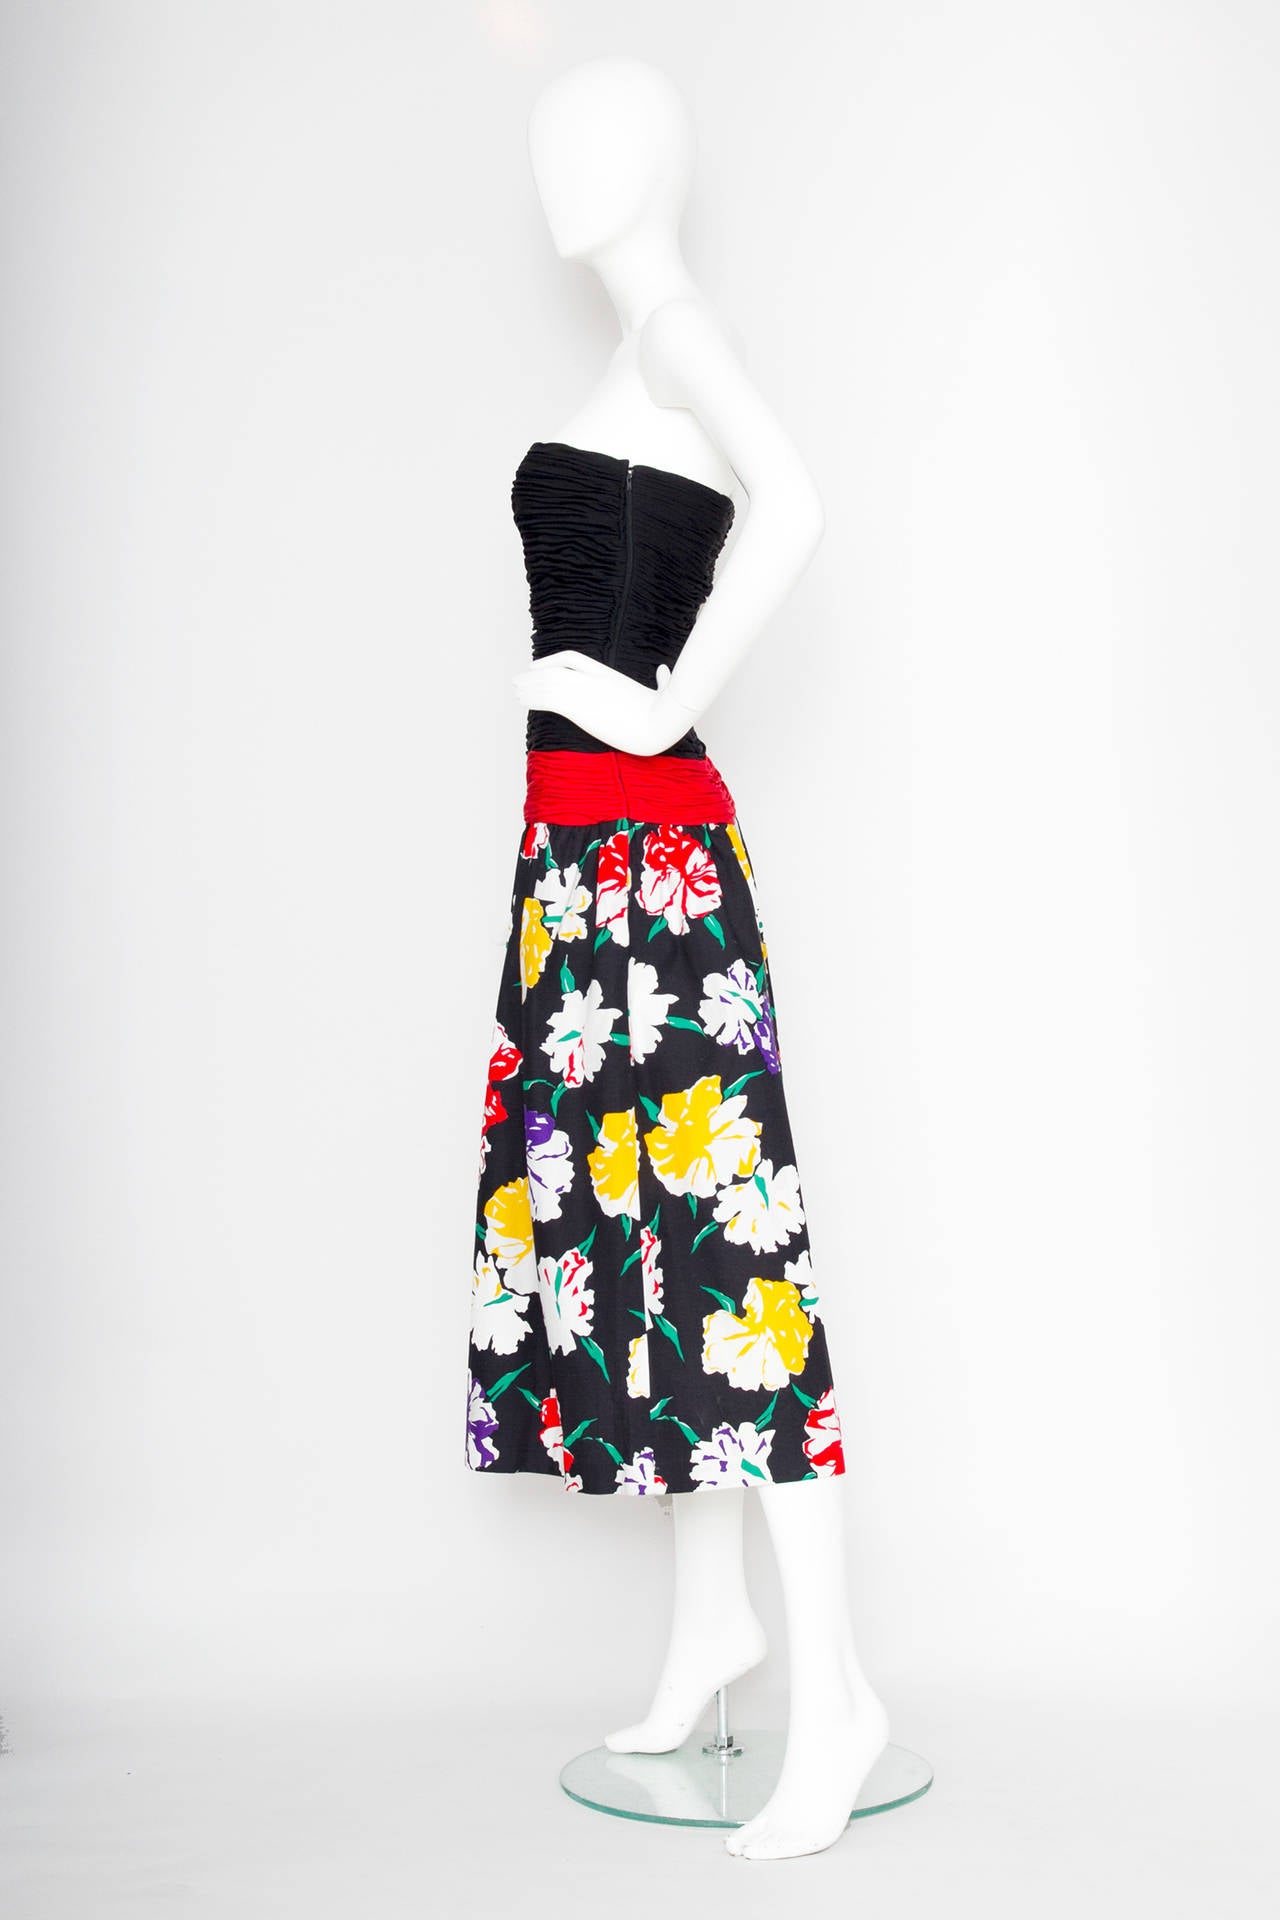 A 1980s Valentino cotton dress with a full floral printed skirt and a fitted ruched bodice, two side pockets and a red sash stretches gently across the hips. The dress closes in the side with a simple zipper and a hook & eye closure.

The